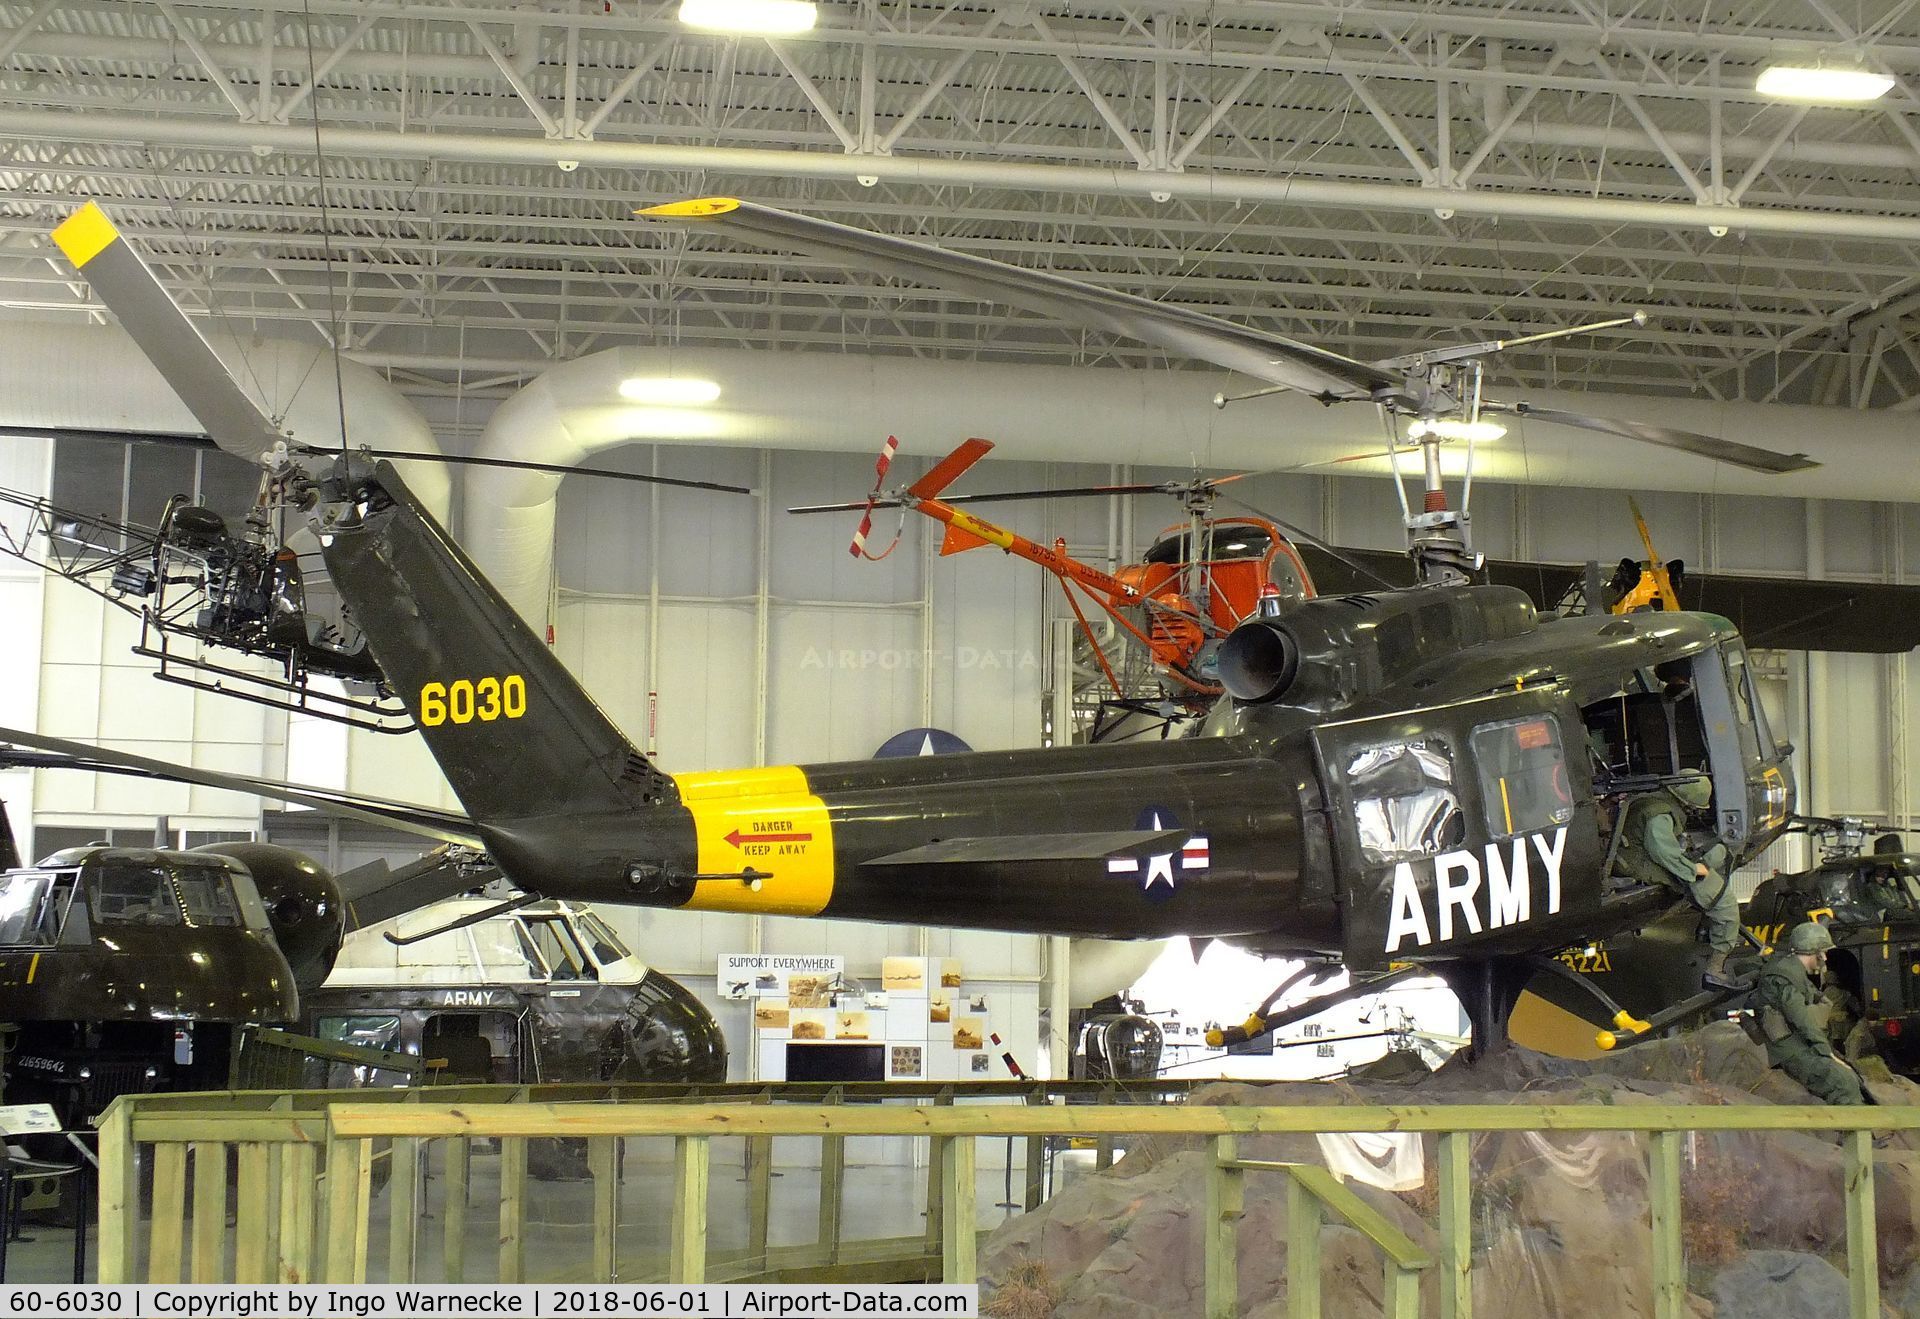 60-6030, 1961 Bell YUH-1D Iroquois C/N 703, Bell YUH-1D Iroquois at the US Army Aviation Museum, Ft. Rucker